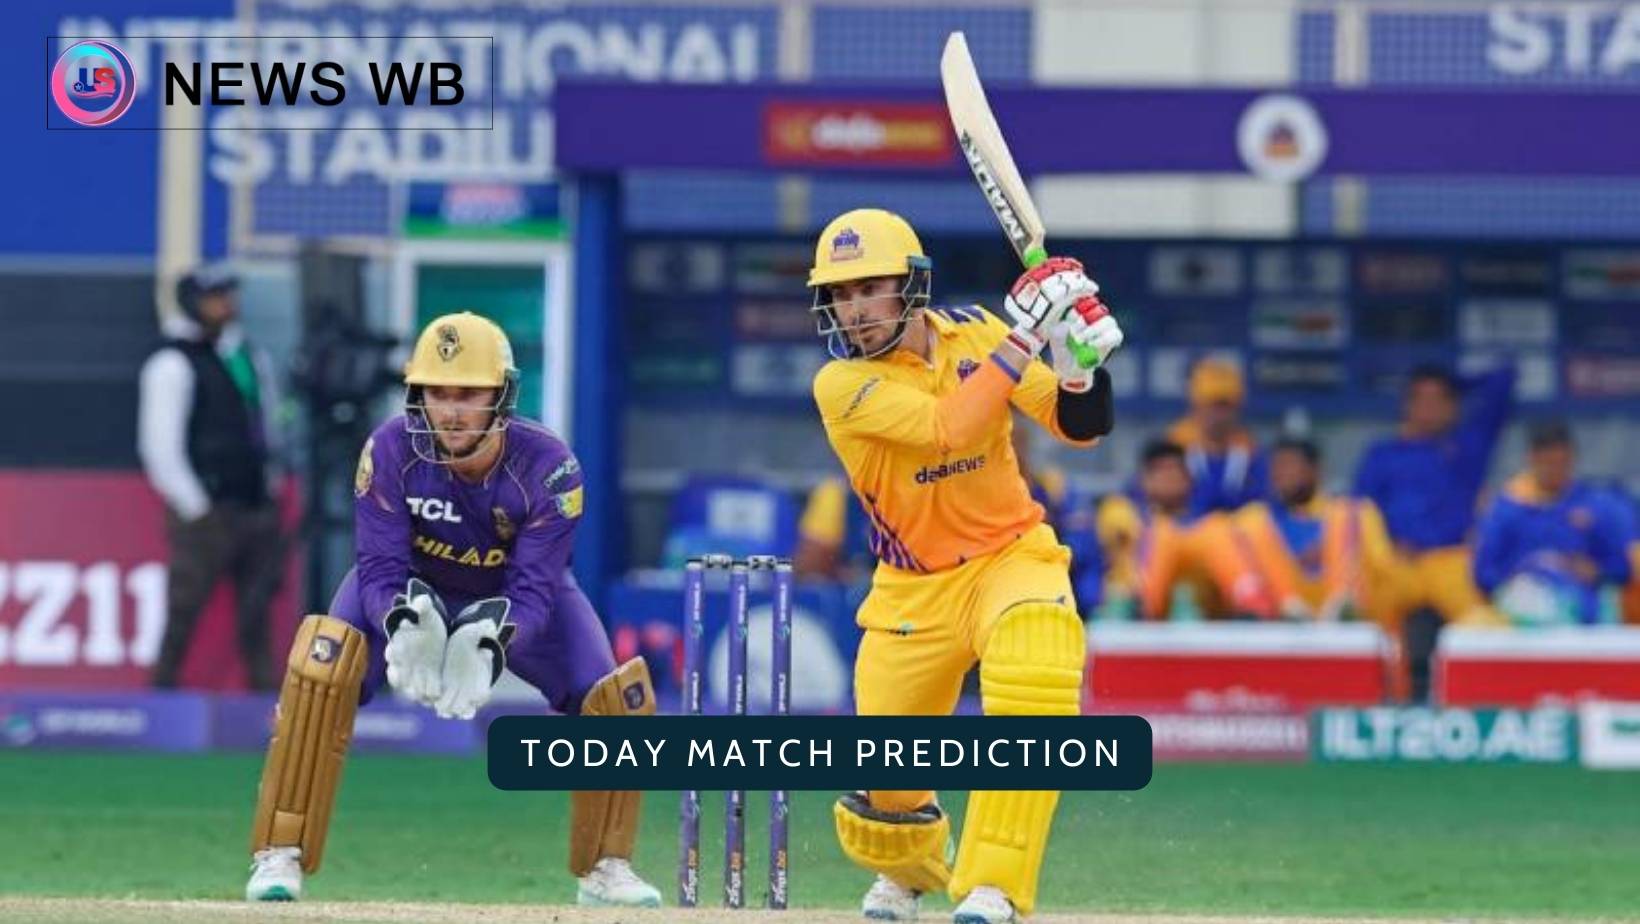 Today Match Prediction: ADKR vs SW Dream11 Team, Abu Dhabi Knight Riders vs Sharjah Warriors 25th Match, Who Will Win?